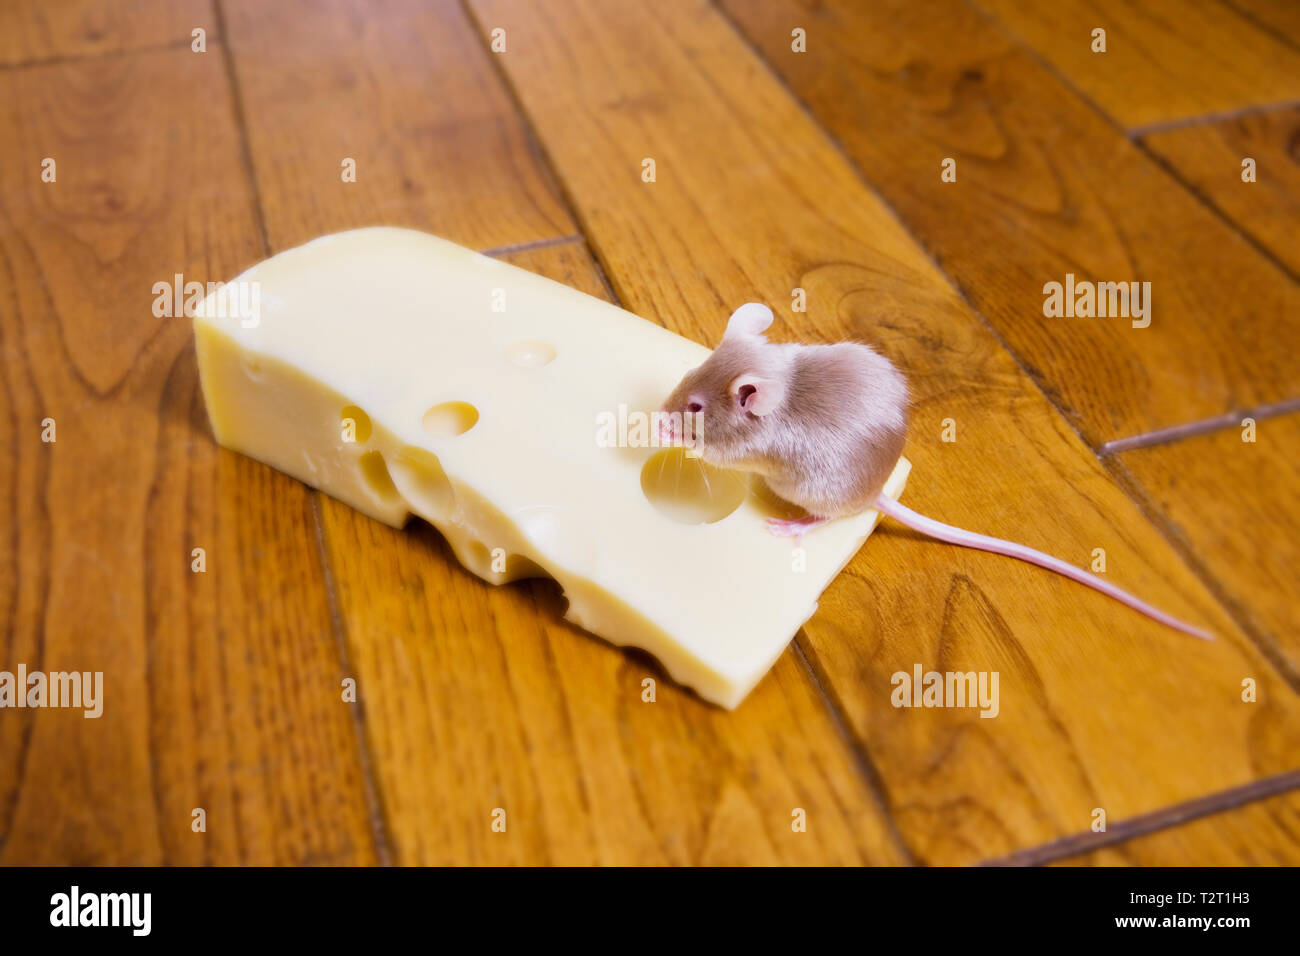 A mouse on a piece of cheese Stock Photo